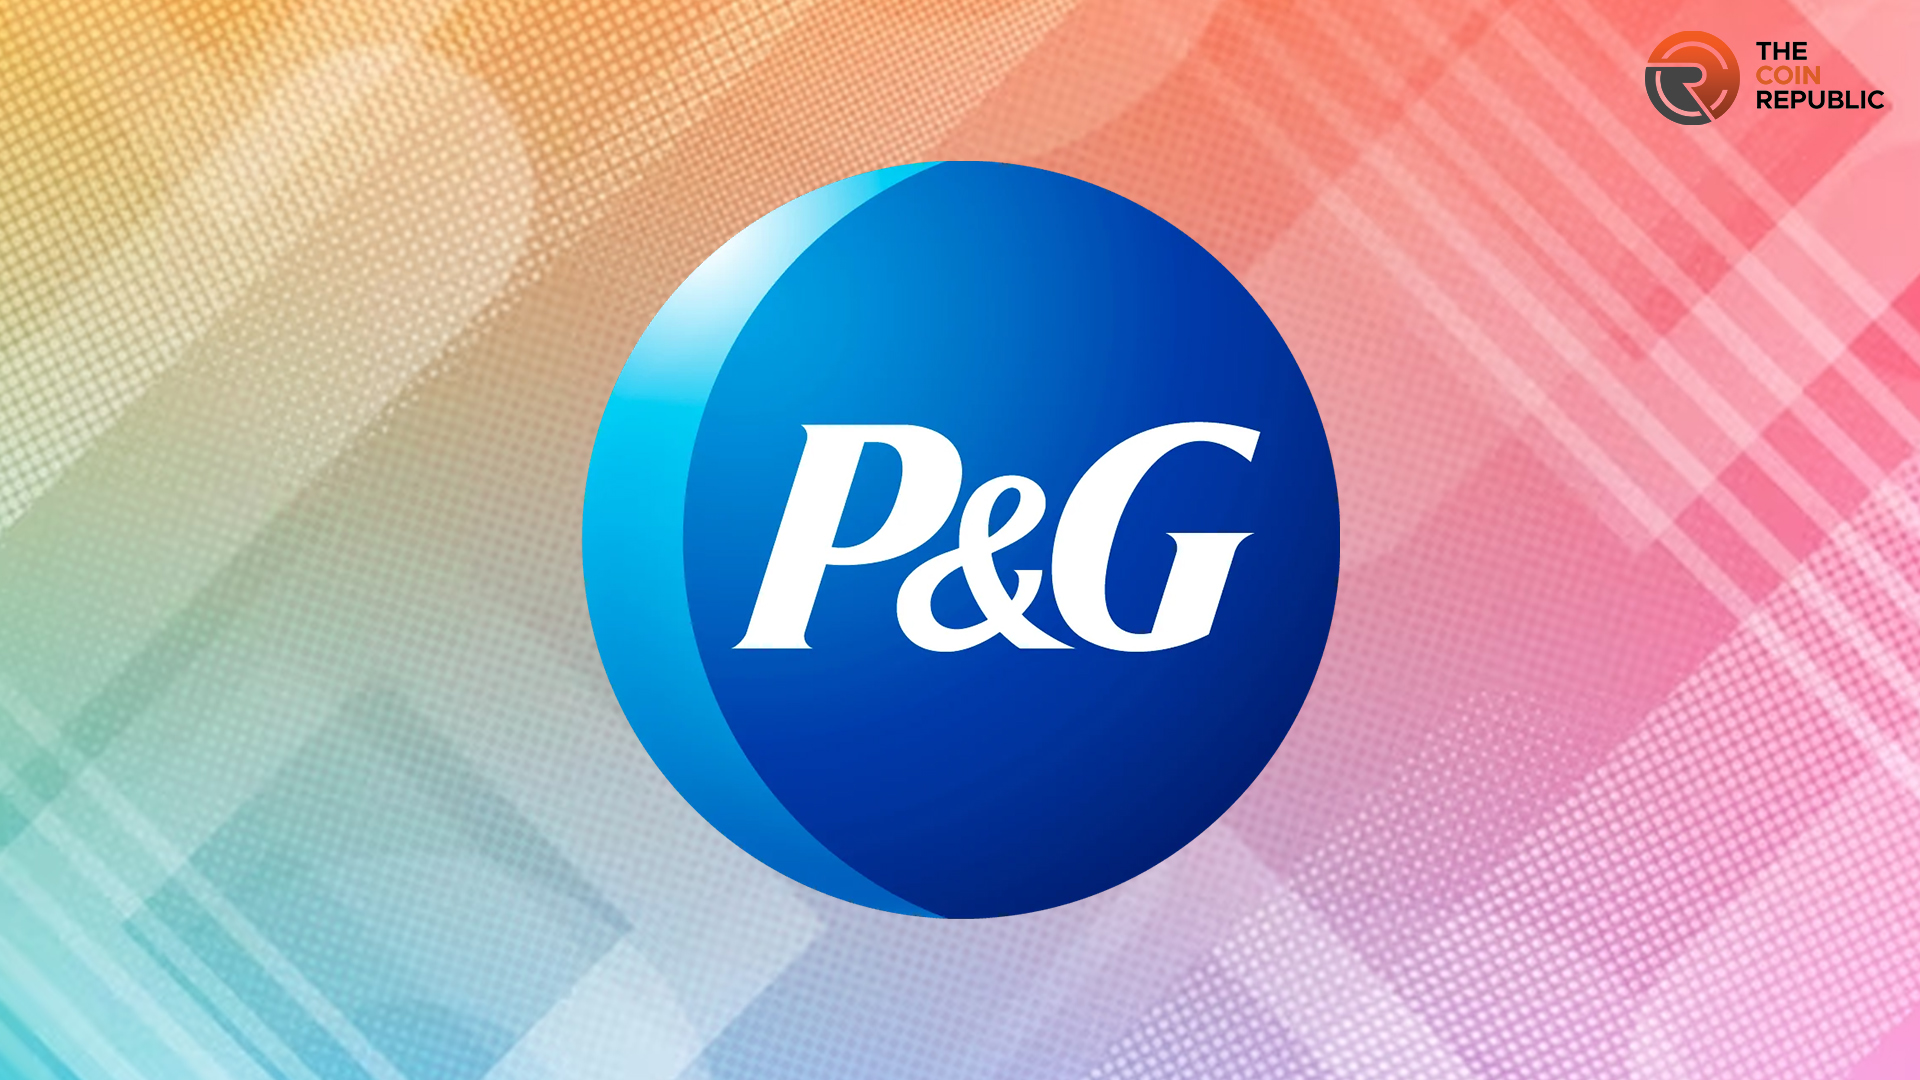 PG Stock Forecast: Is $200 The Next Big Target For PG Stock?